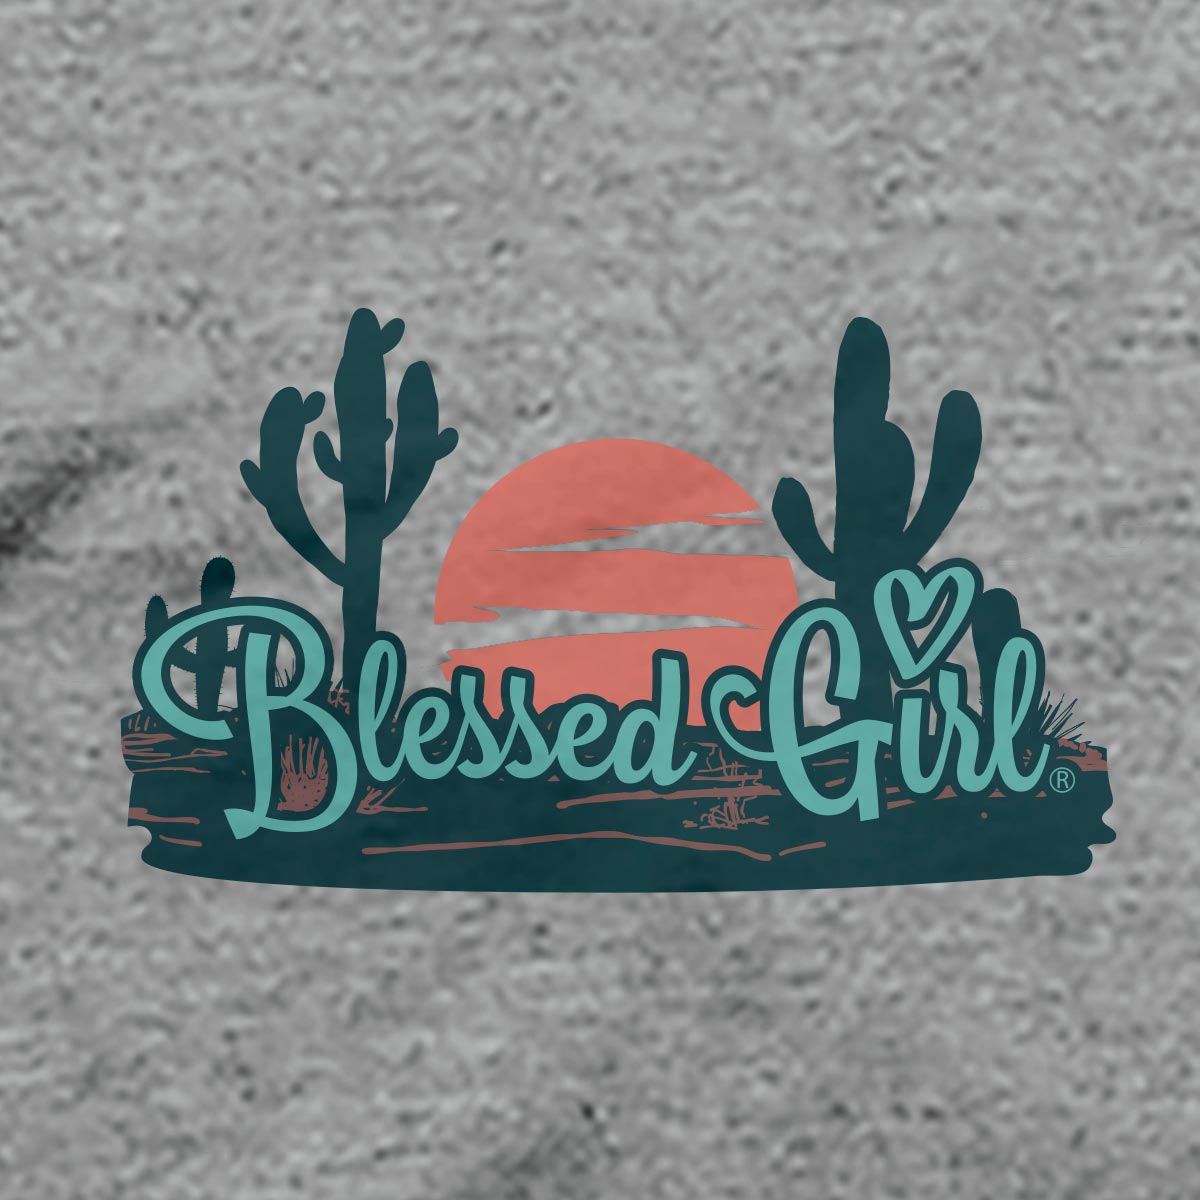 Blessed Girl Womens T-Shirt Strength & Dignity